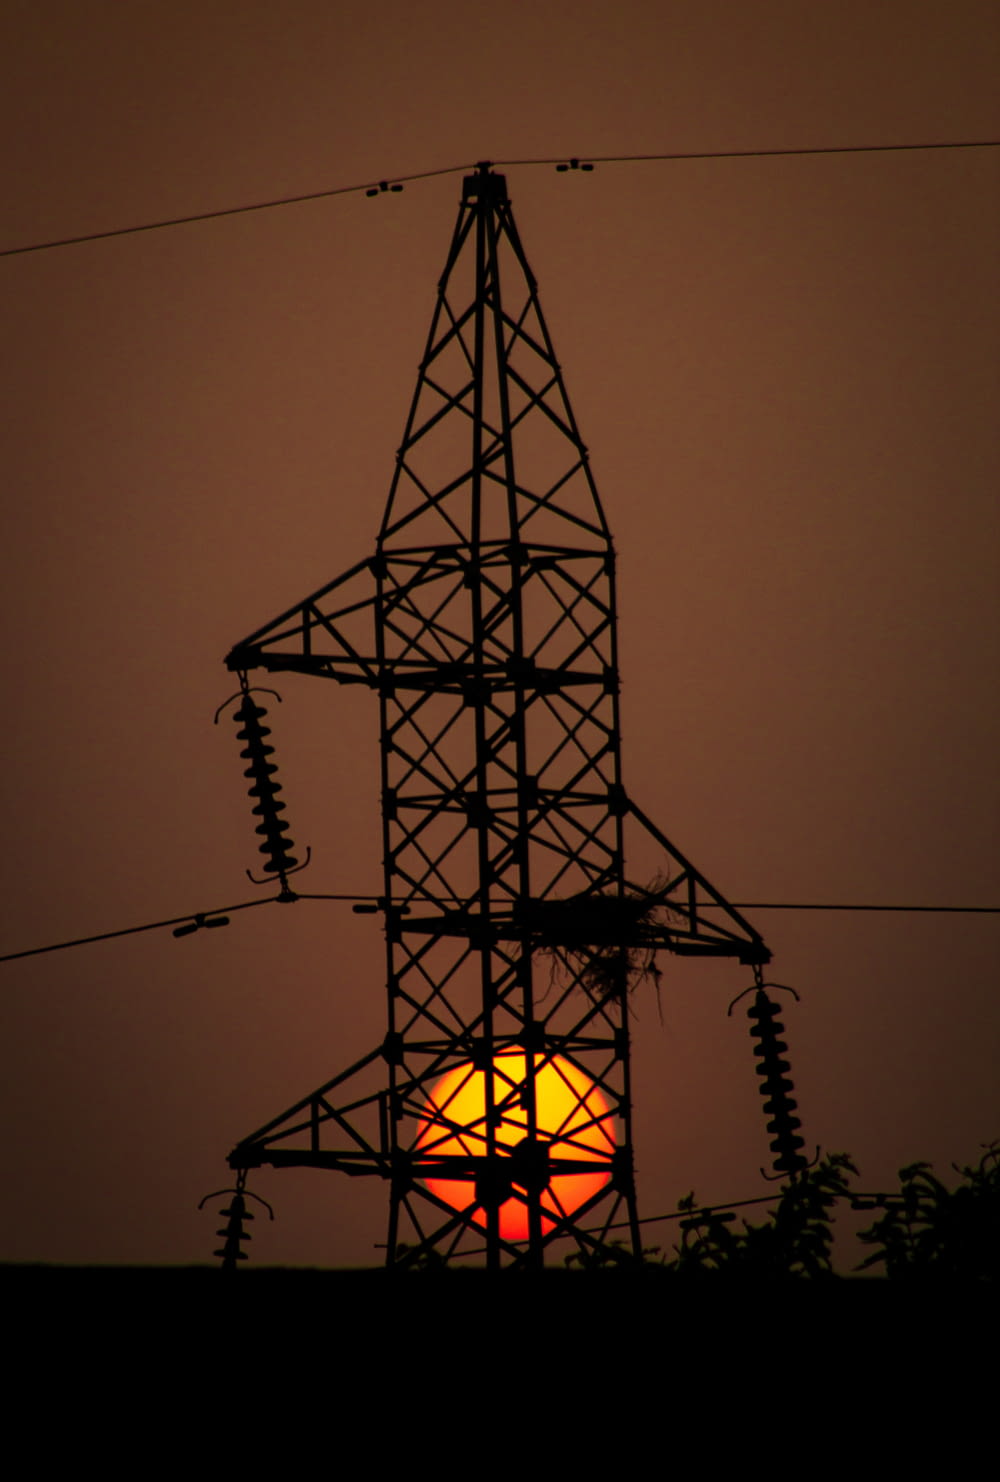 the sun is setting behind a power line tower